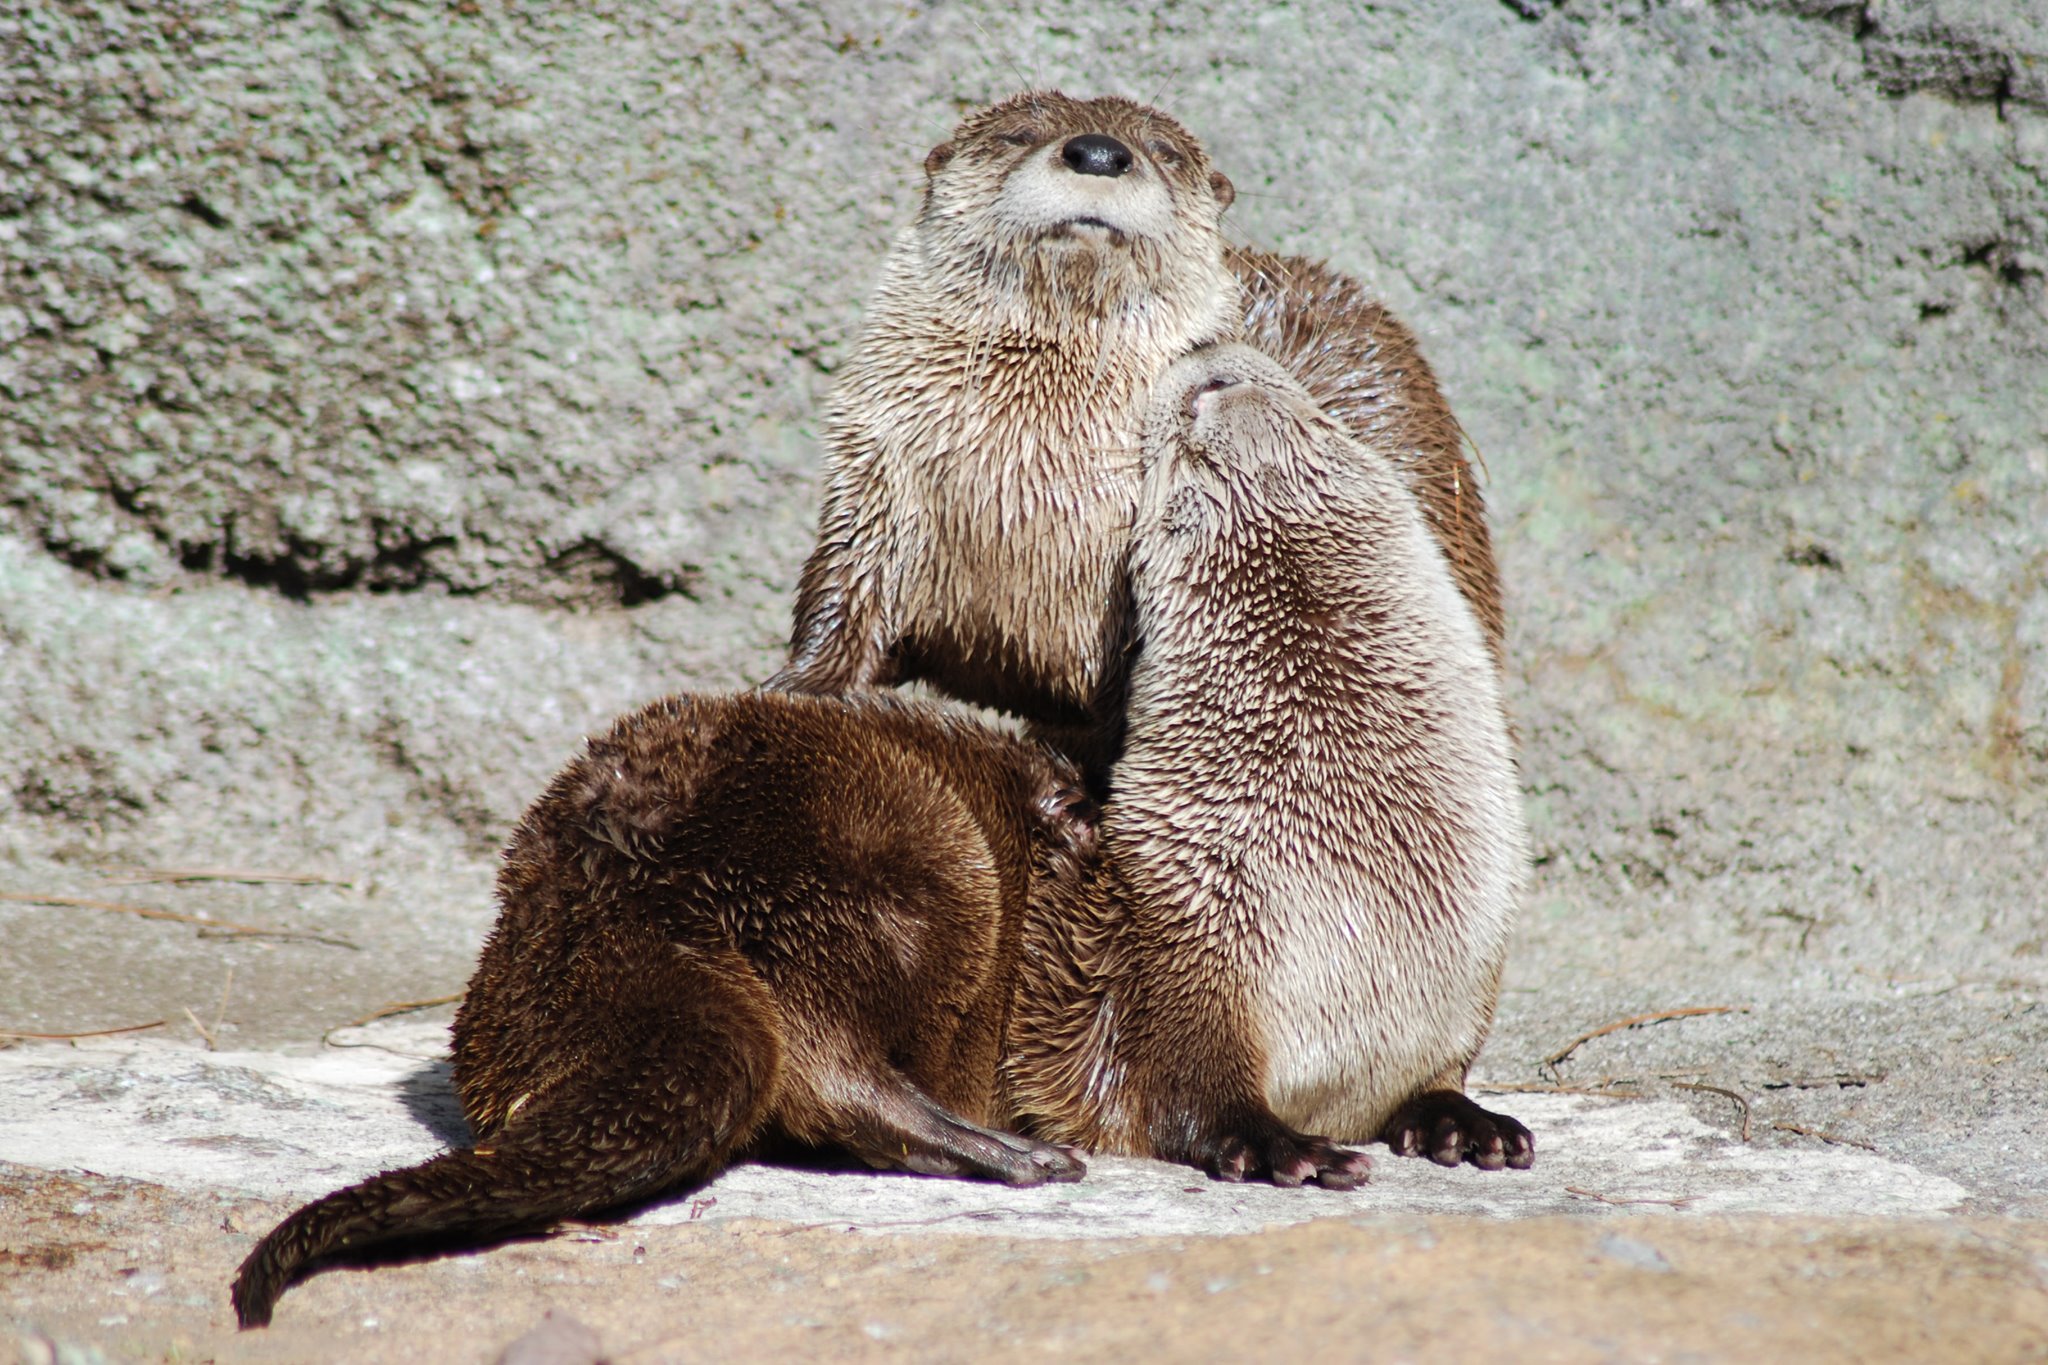 Otters snuggle up to one another at Grandfather Mountain Nature Preserve